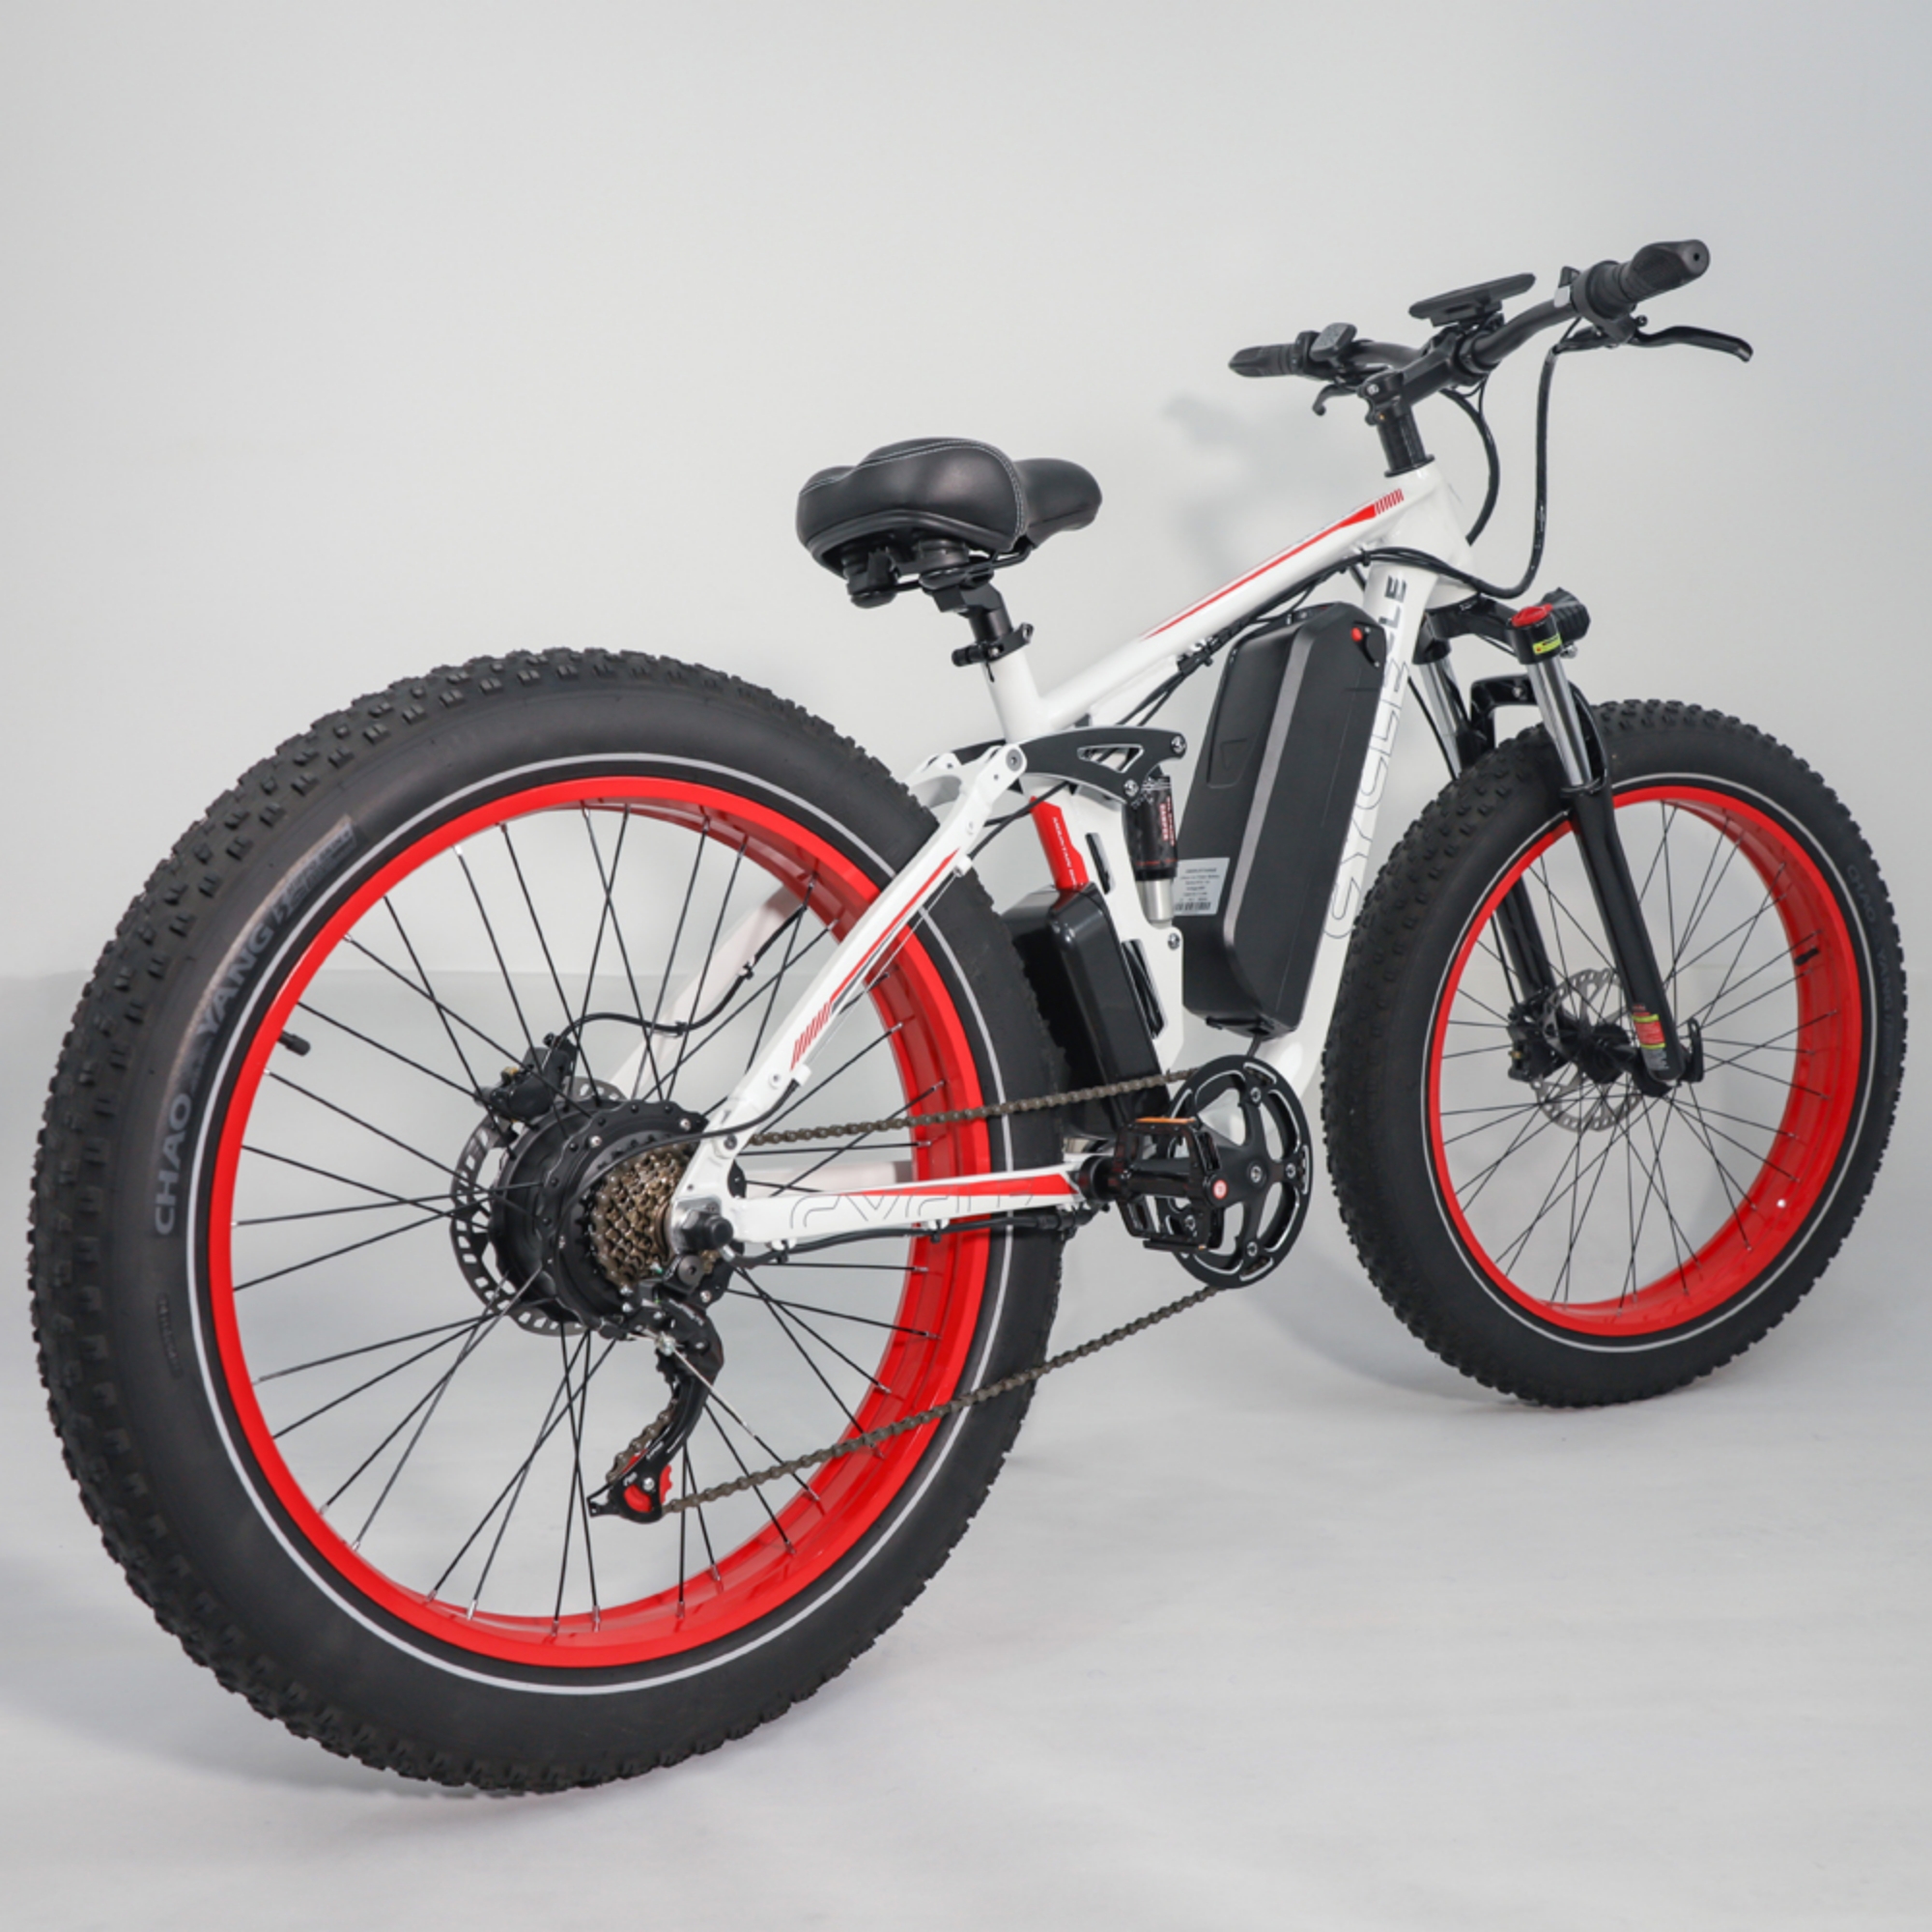 US Stock Fast Delivery 750W Powerful Motor Full Suspension Ebike 26" Fat Tire Electric Bike for Adults